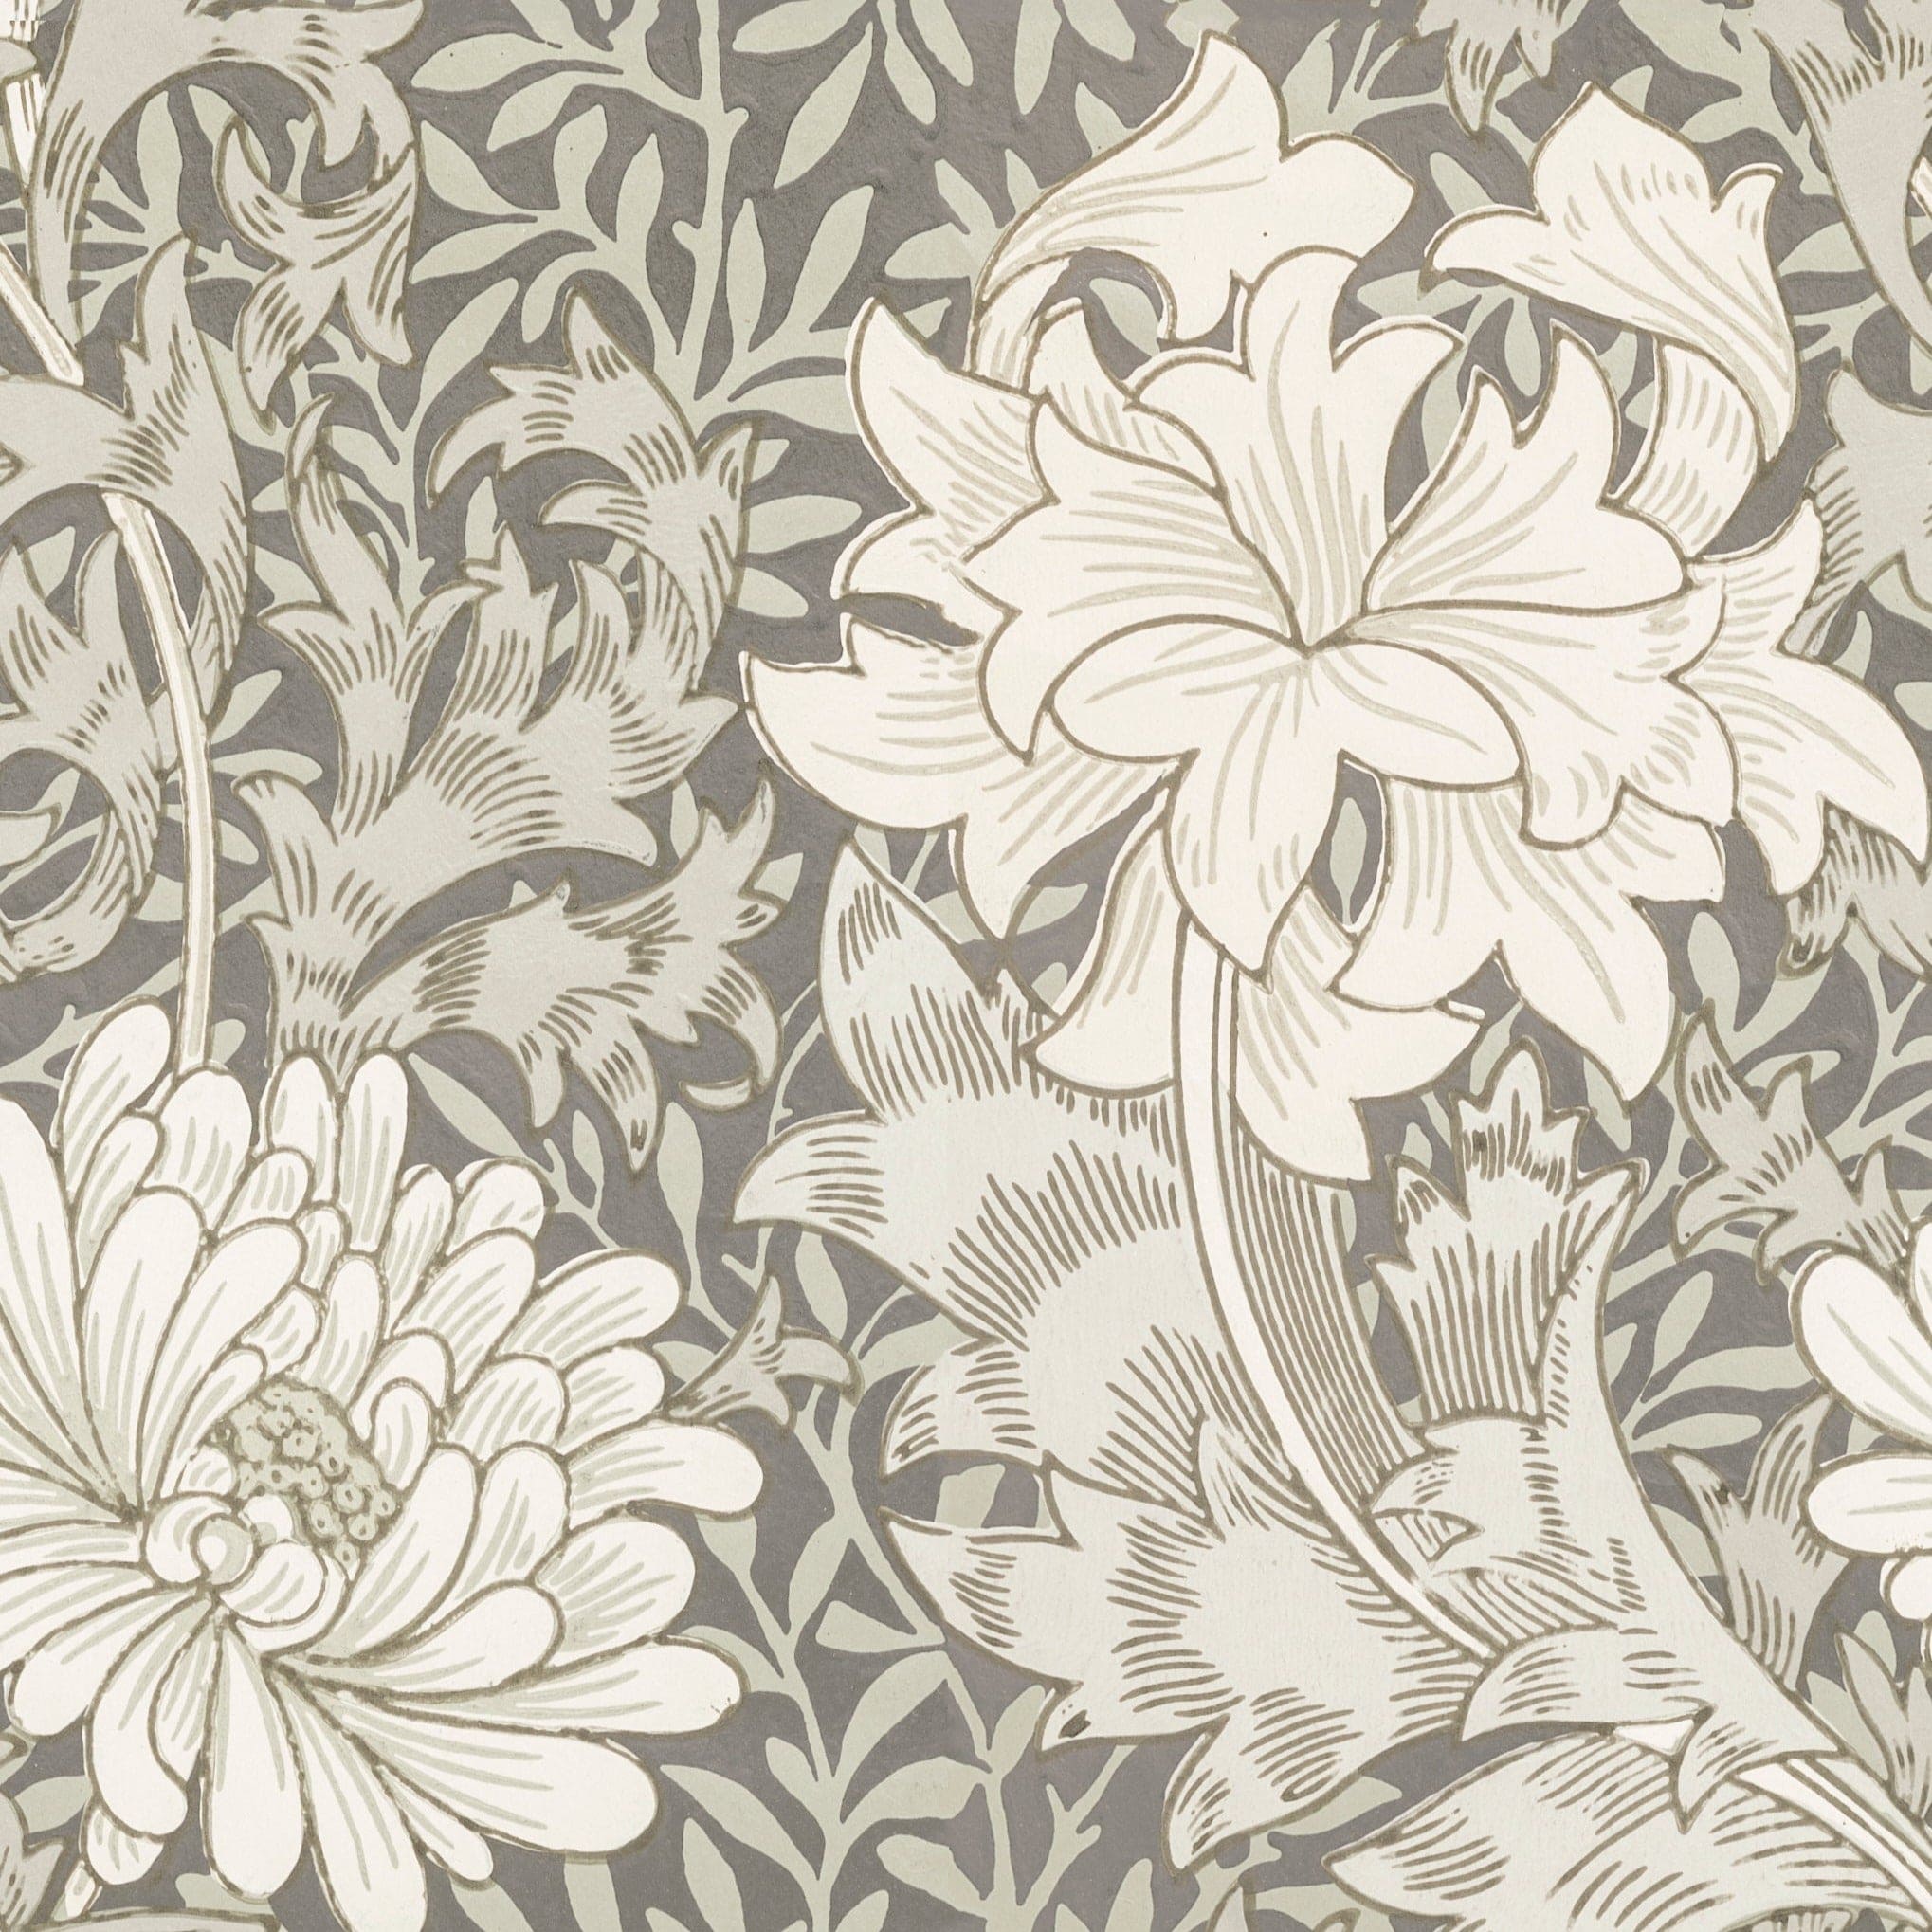 A detailed view of the Entwined Elegance Wallpaper, displaying its intricate floral design with large blooms and foliage in shades of gray on a muted background, exuding a classic and timeless aesthetic.